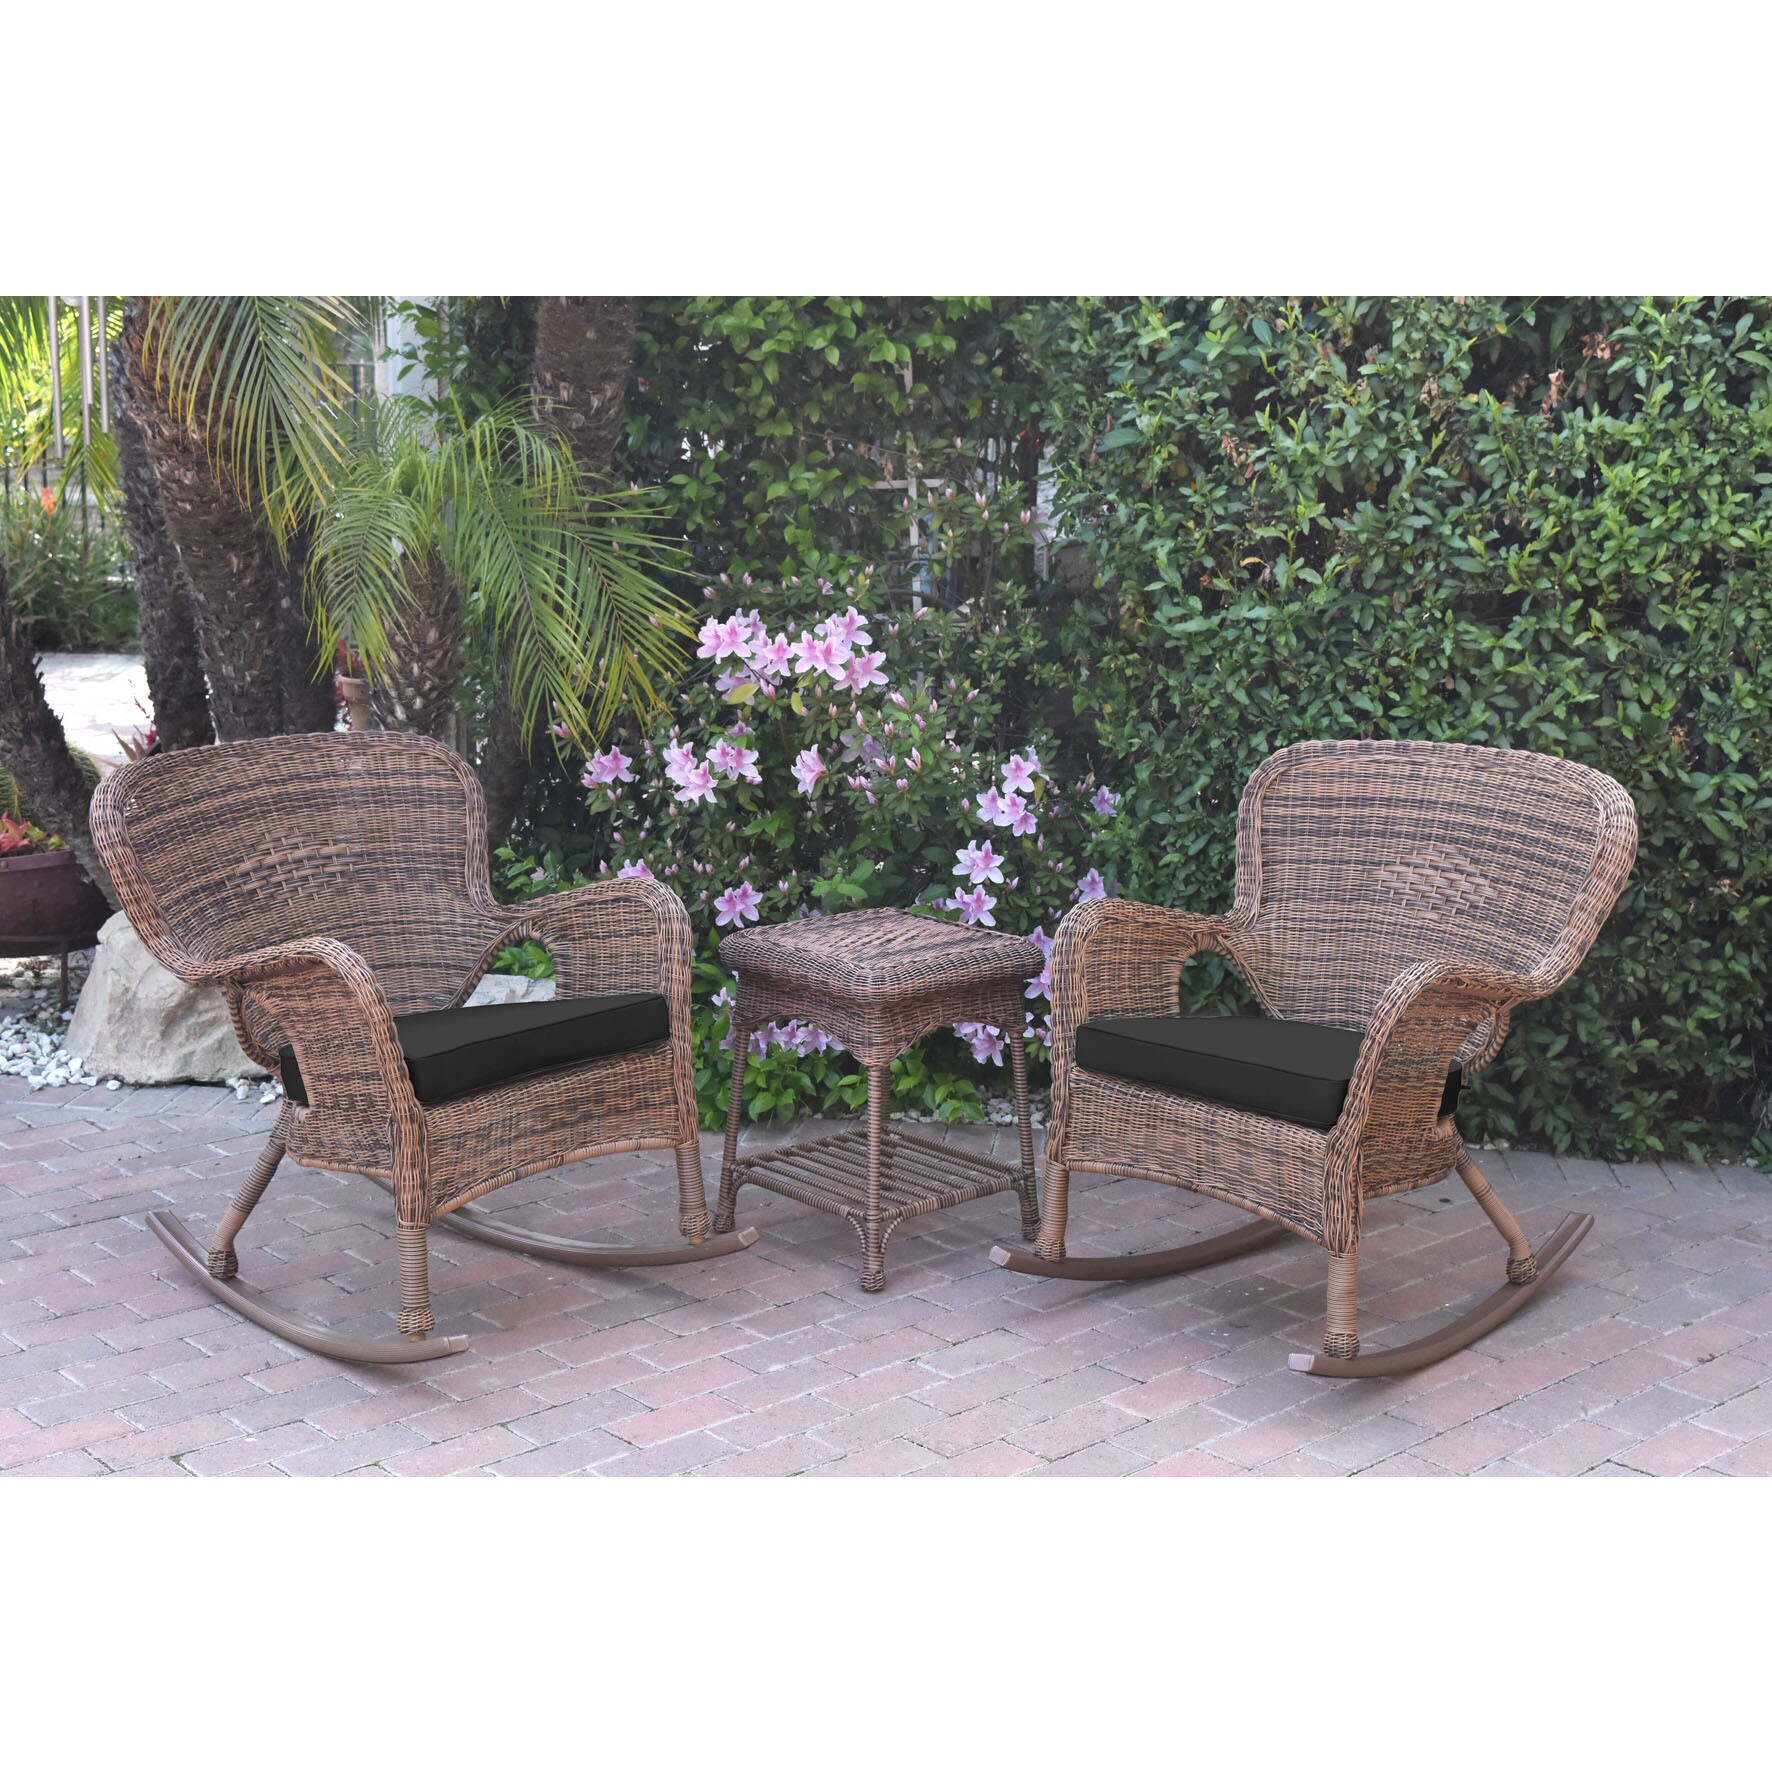 Jeco Windsor Honey Wicker Rocker Chair And End Table Set With Cushions